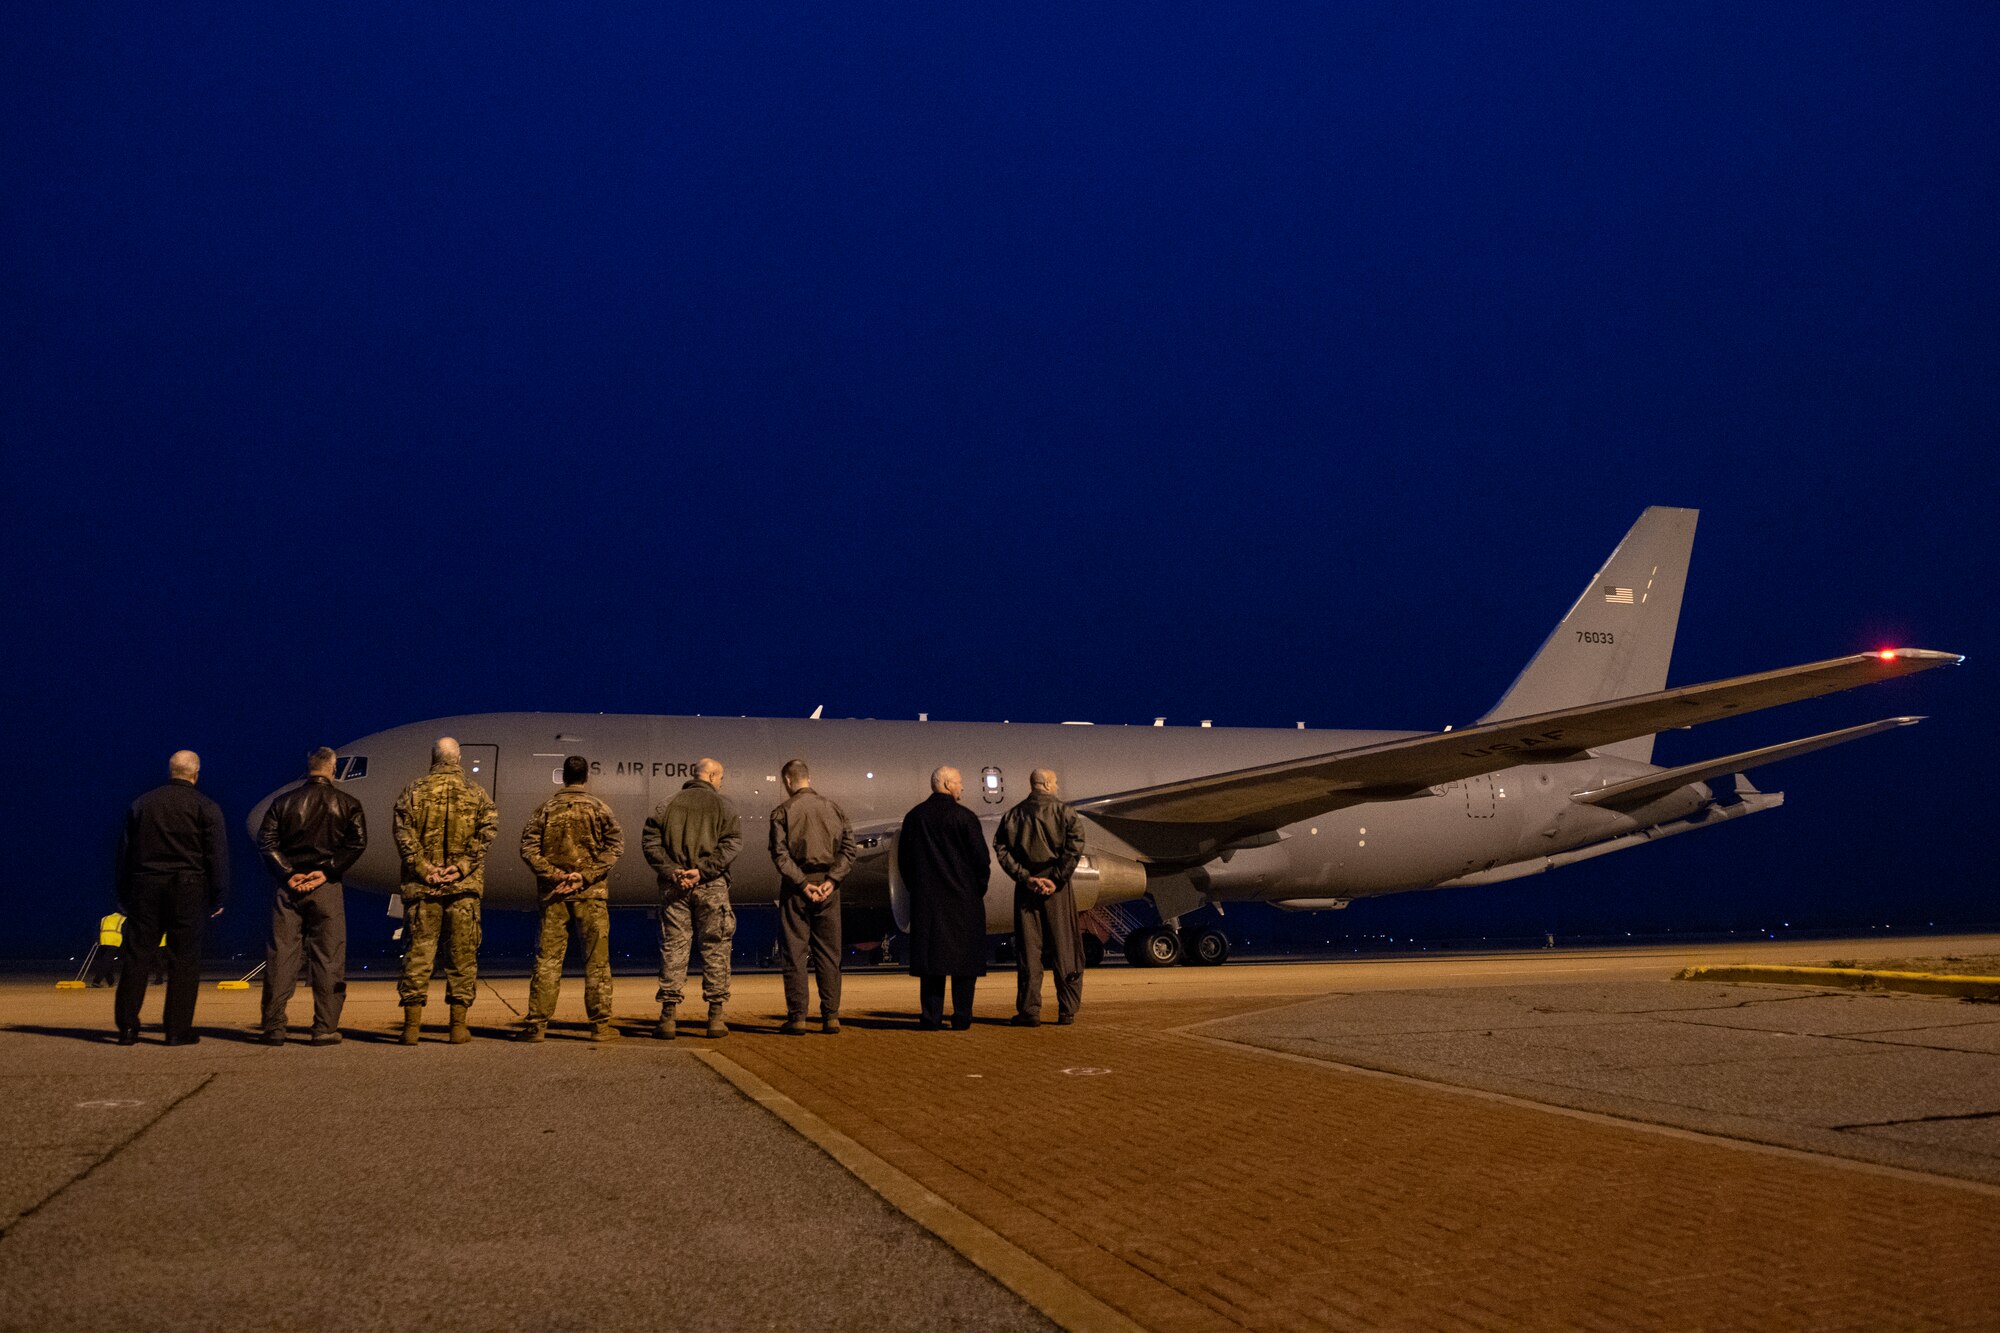 ALTUS AIR FORCE BASE, Okla. - U.S. Air Force Col. Eric Carney 97th Air Mobility Wing commander, and fellow members of Wing leadership, wait to greet various distinguished visitors on the flightline at Altus Air Force Base, Okla., March 11, 2019.